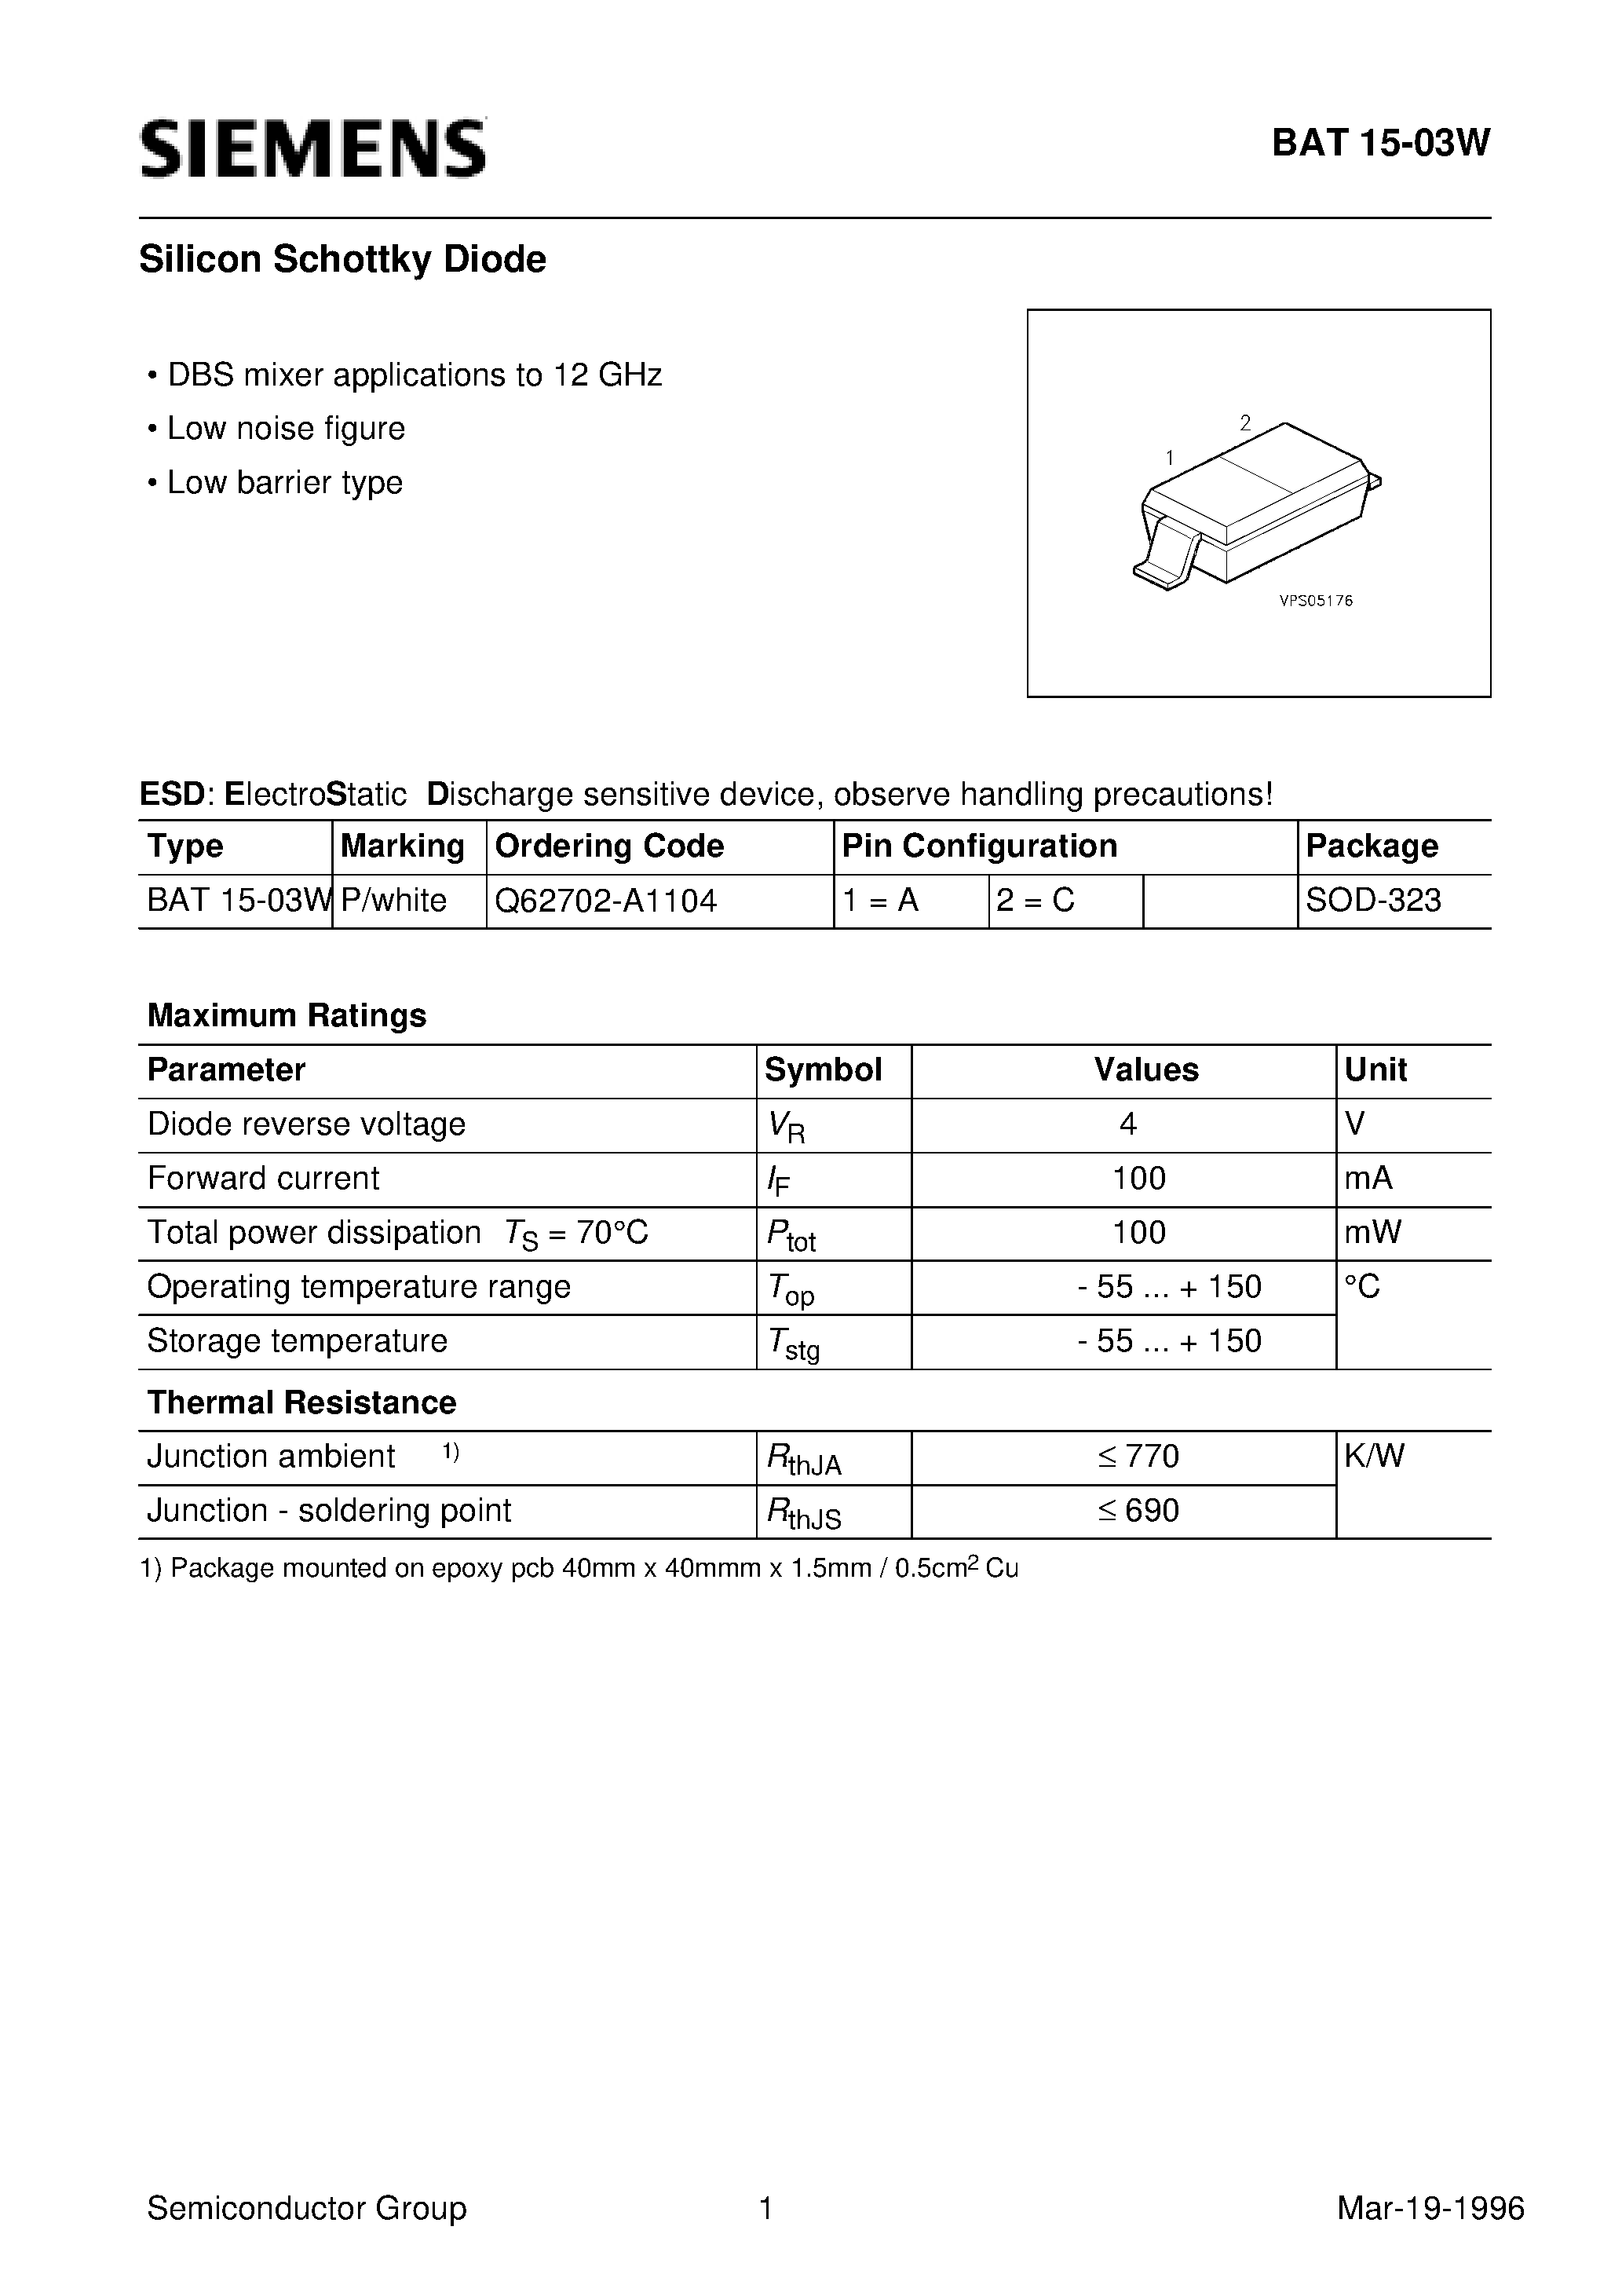 Datasheet BAT15-03W - Silicon Schottky Diode (DBS mixer applications to 12 GHz Low noise figure Low barrier type) page 1